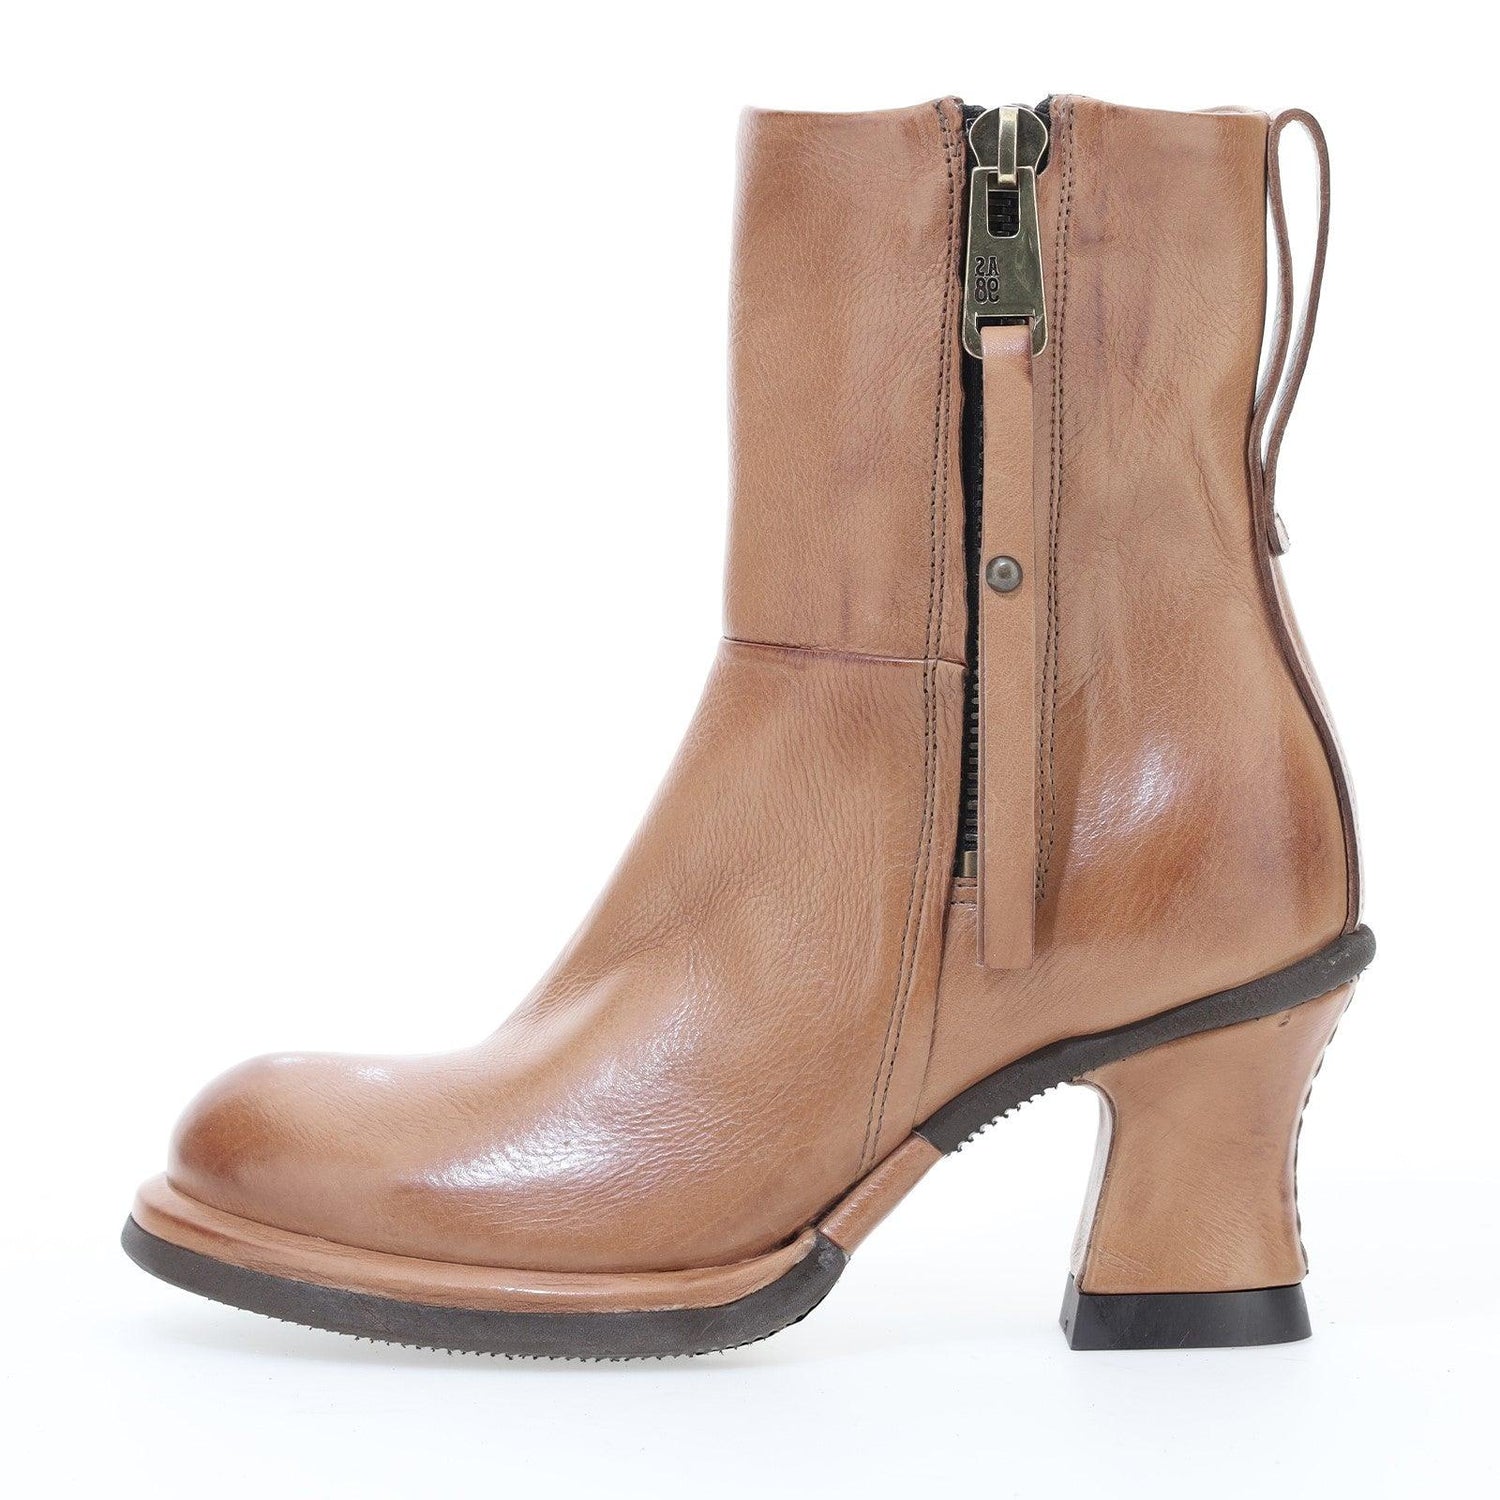 Nelle - A.S. 98 - Boots